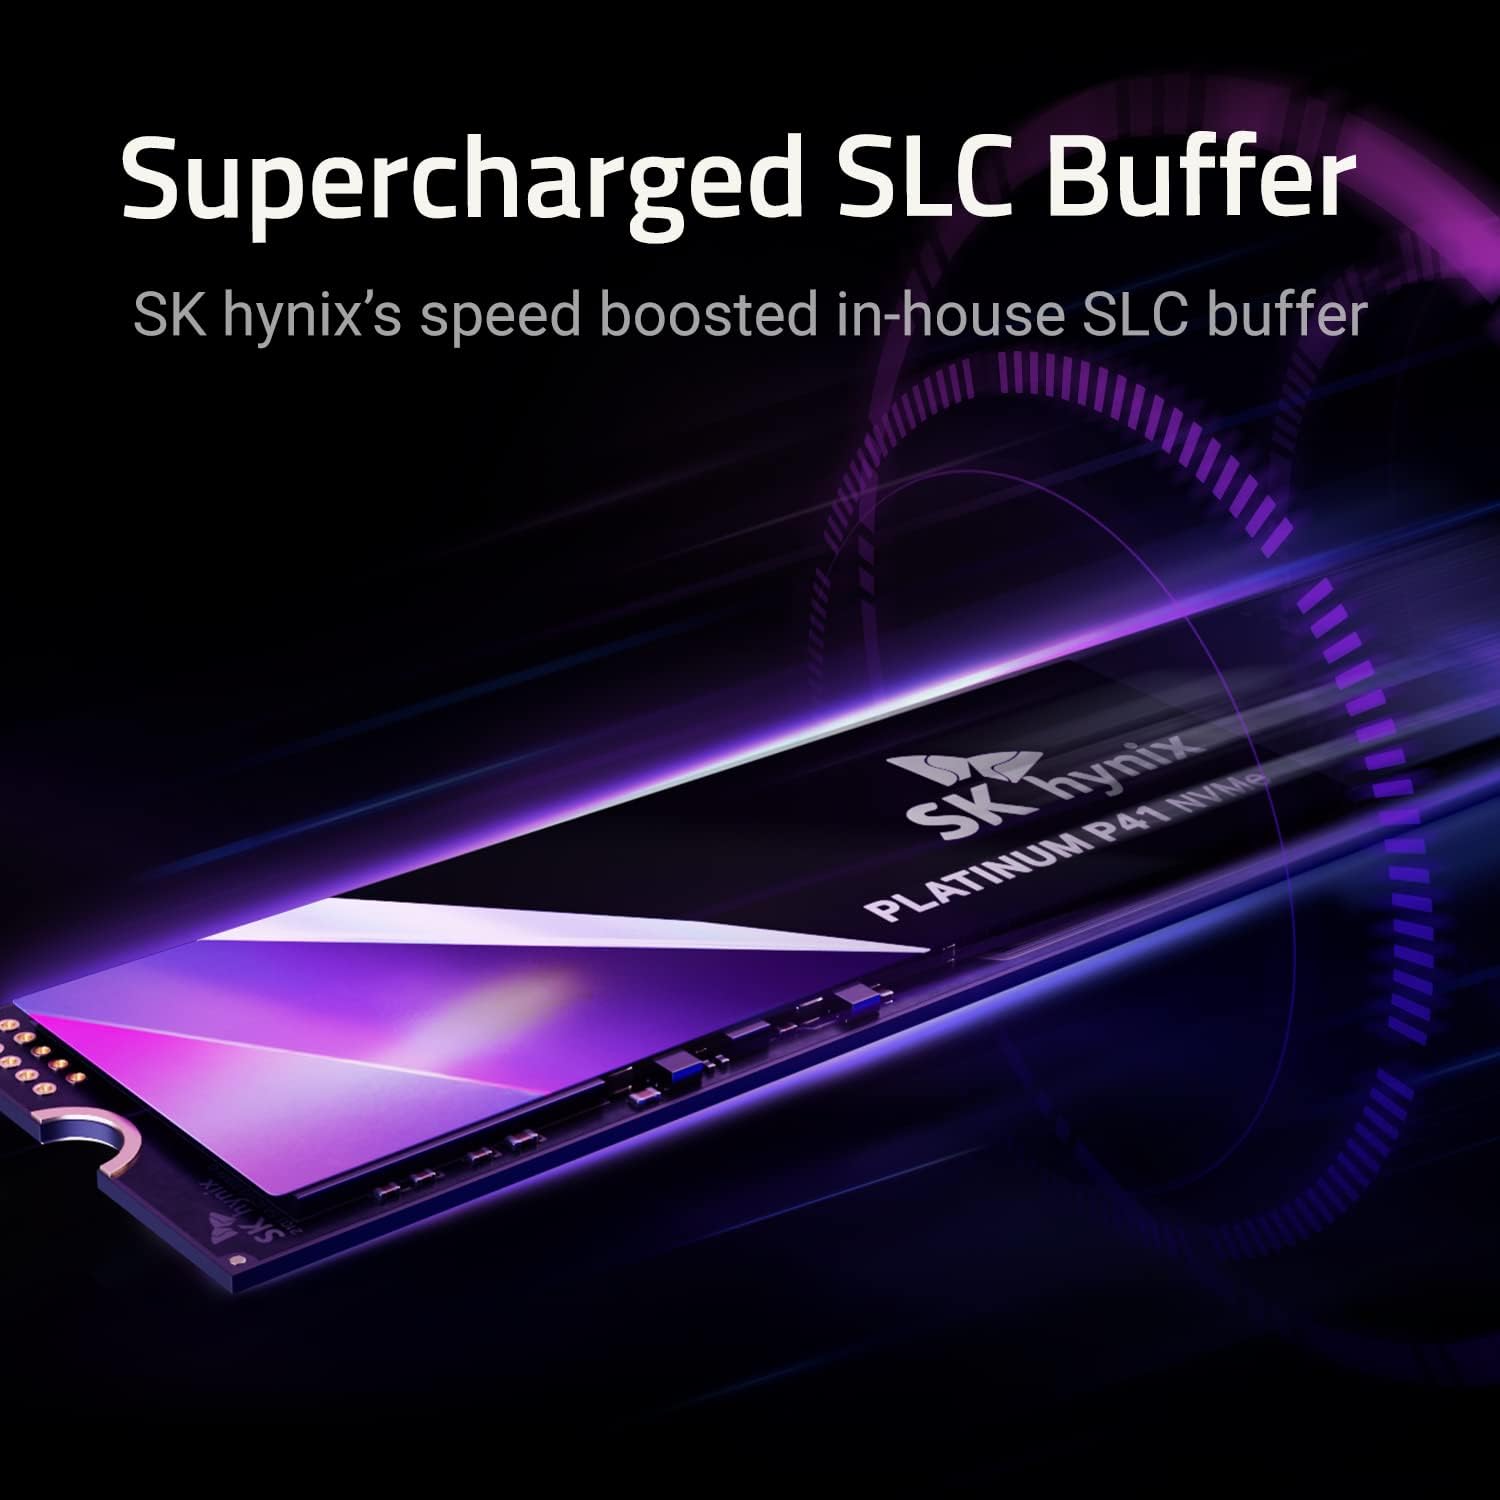 SK hynix Platinum P41 2TB PCIe NVMe Gen4 M.2 2280 Internal Gaming SSD, Up to 7,000MB/S, Compact SSD Form Factor - Solid State Drive with 176-Layer NAND Flash